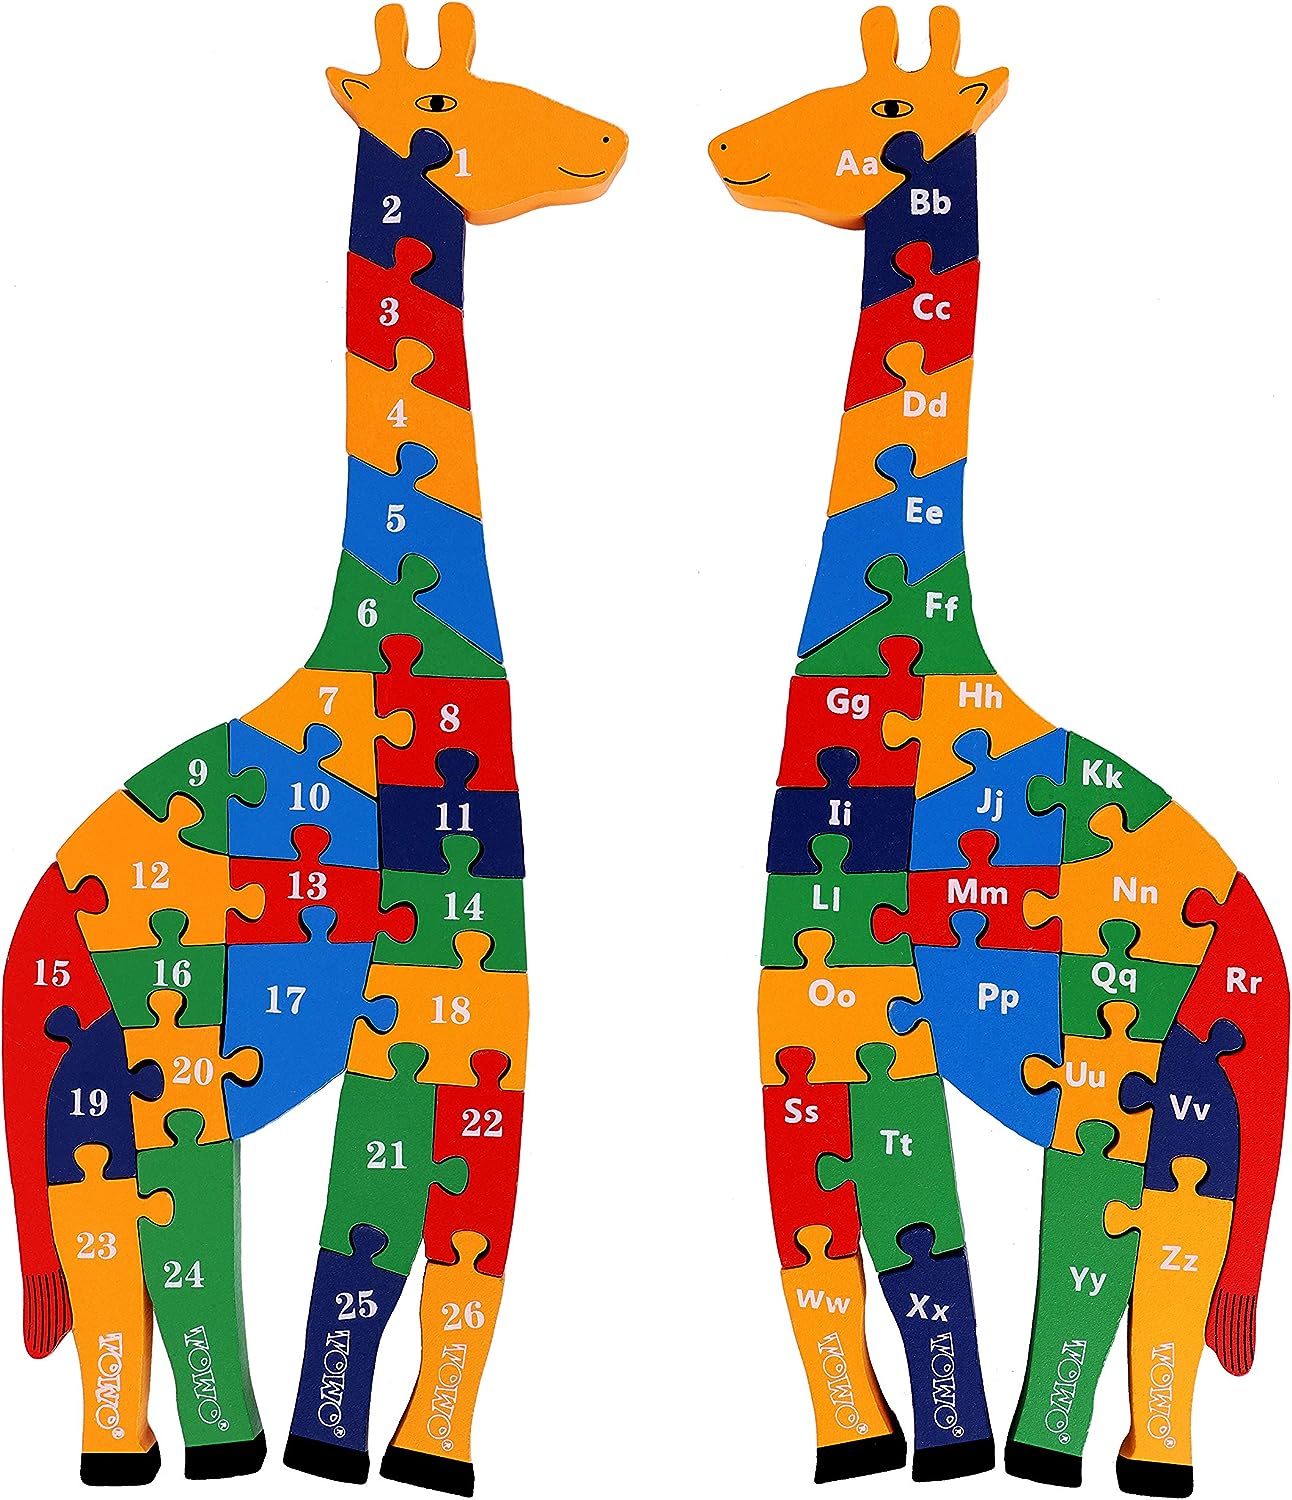 TOWO Wooden Giraffe Alphabet Blocks and Number Blocks Jigsaw Puzzle 41 cm Large Size 2 in 1 ABC Number Puzzle - Wooden Letter Blocks Puzzle Number Puzzles Educational Toys for 3 Year olds